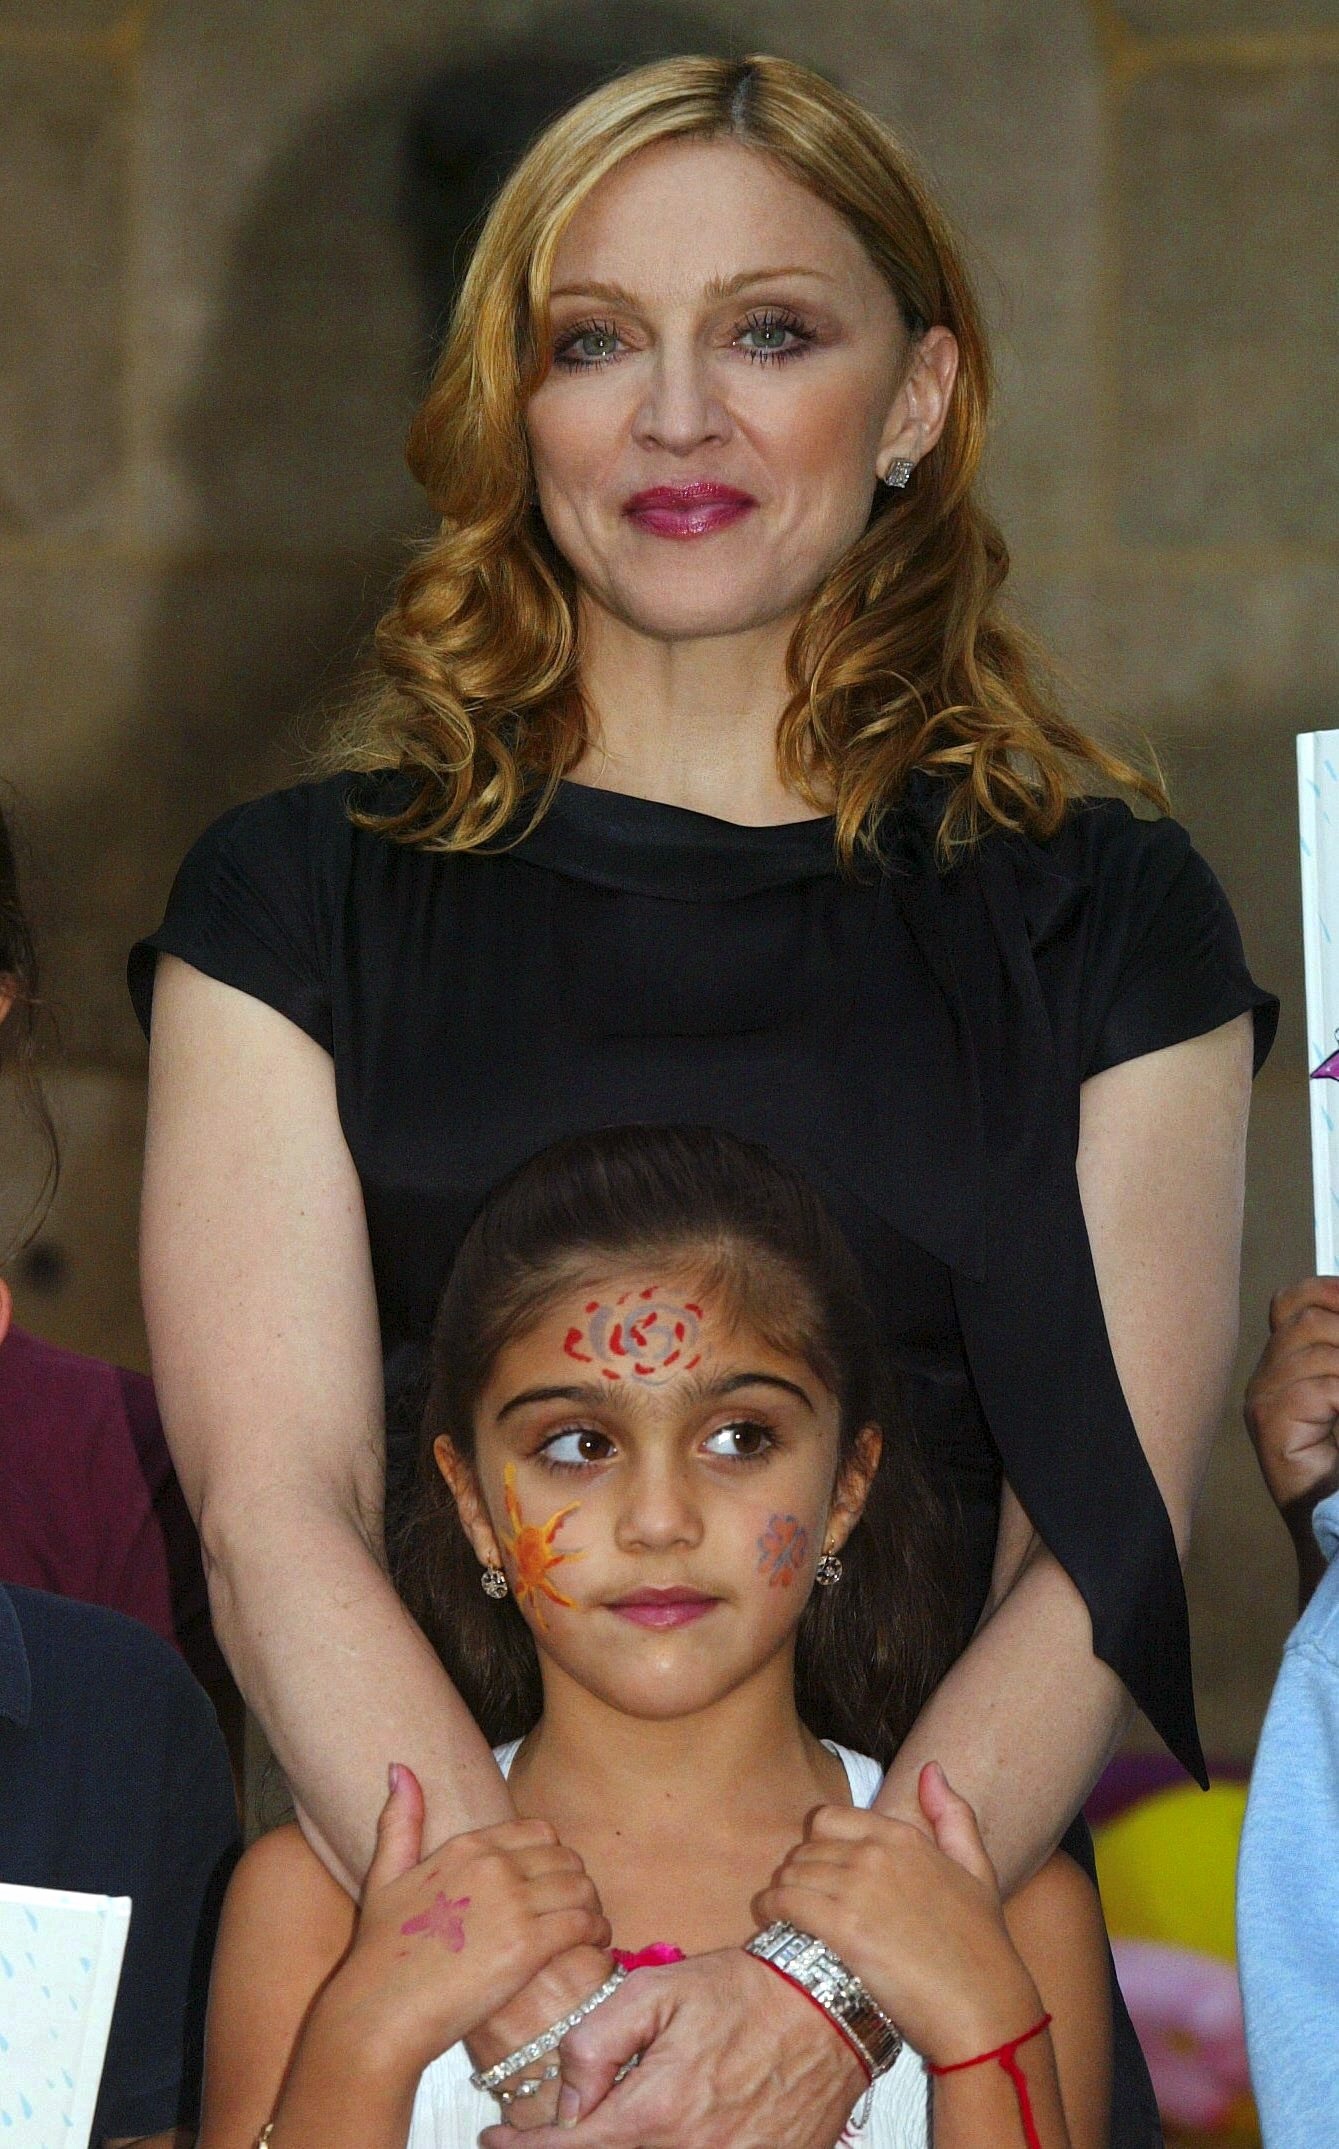 Madonna with her daughter Lourdes "Lola" Leon on September 15, 2003 in Paris, France | Source: Getty Images